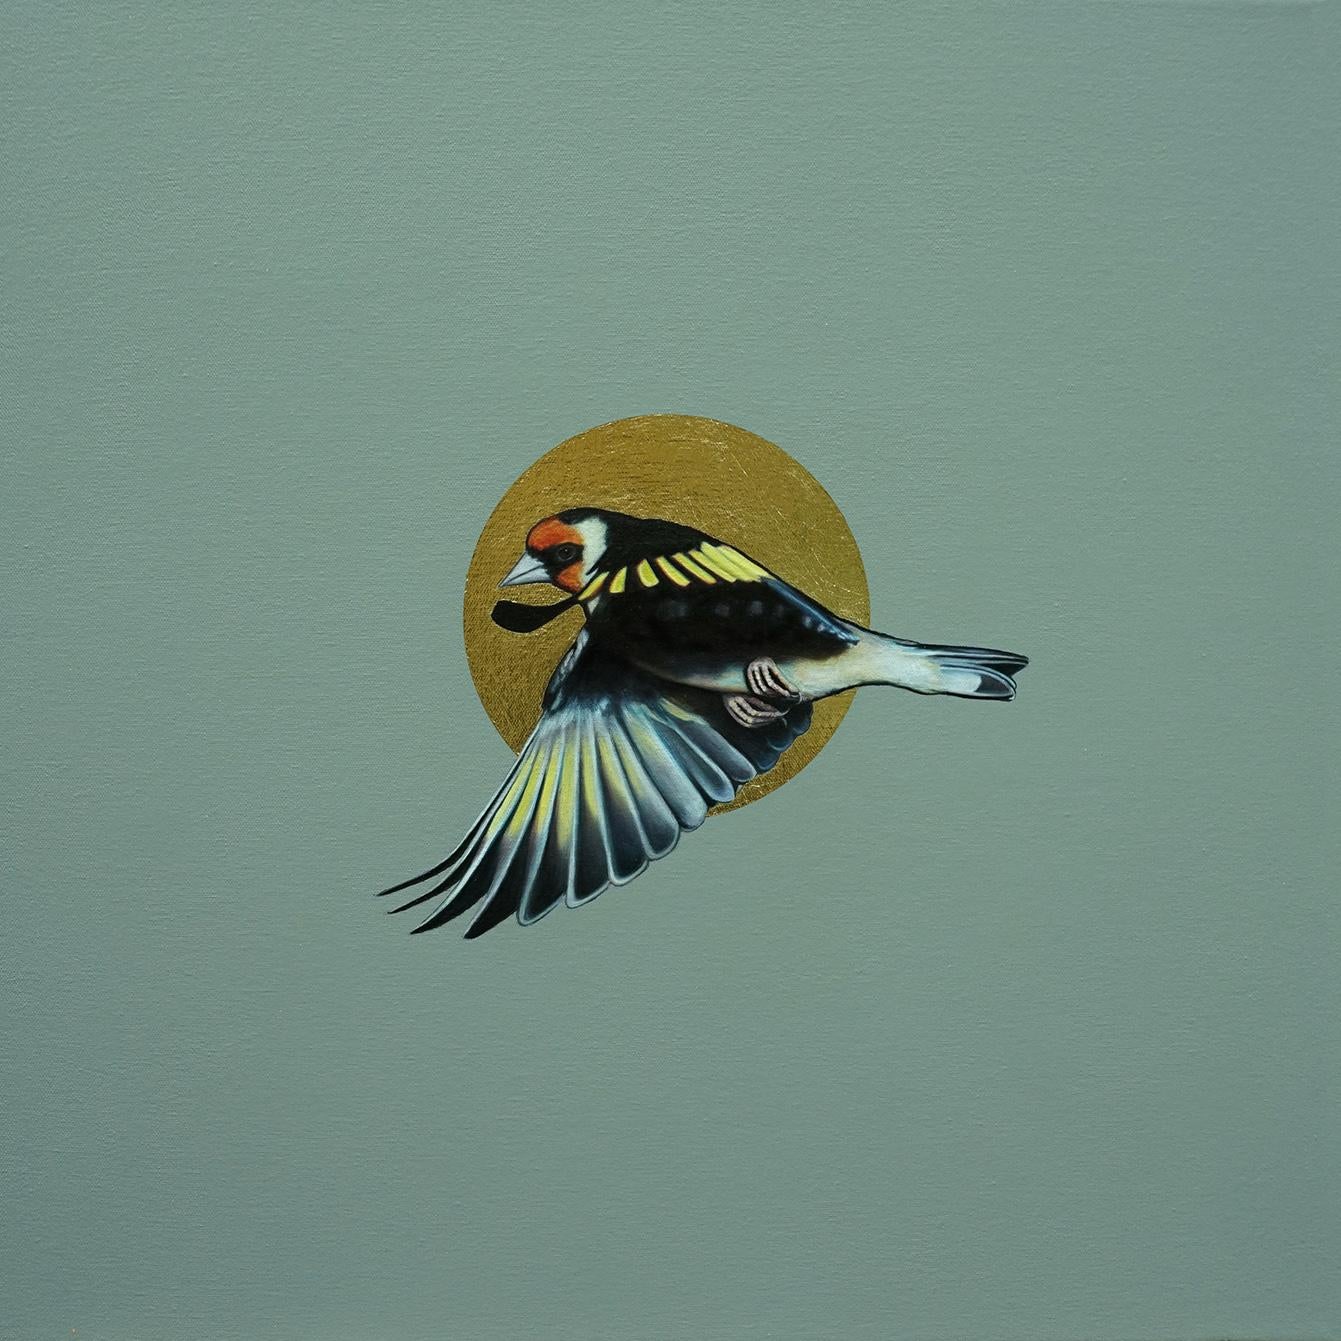 Helios II - Finch Bird in Flight with Gold Sun: Oil on Canvas - Painting by Mike Ellis